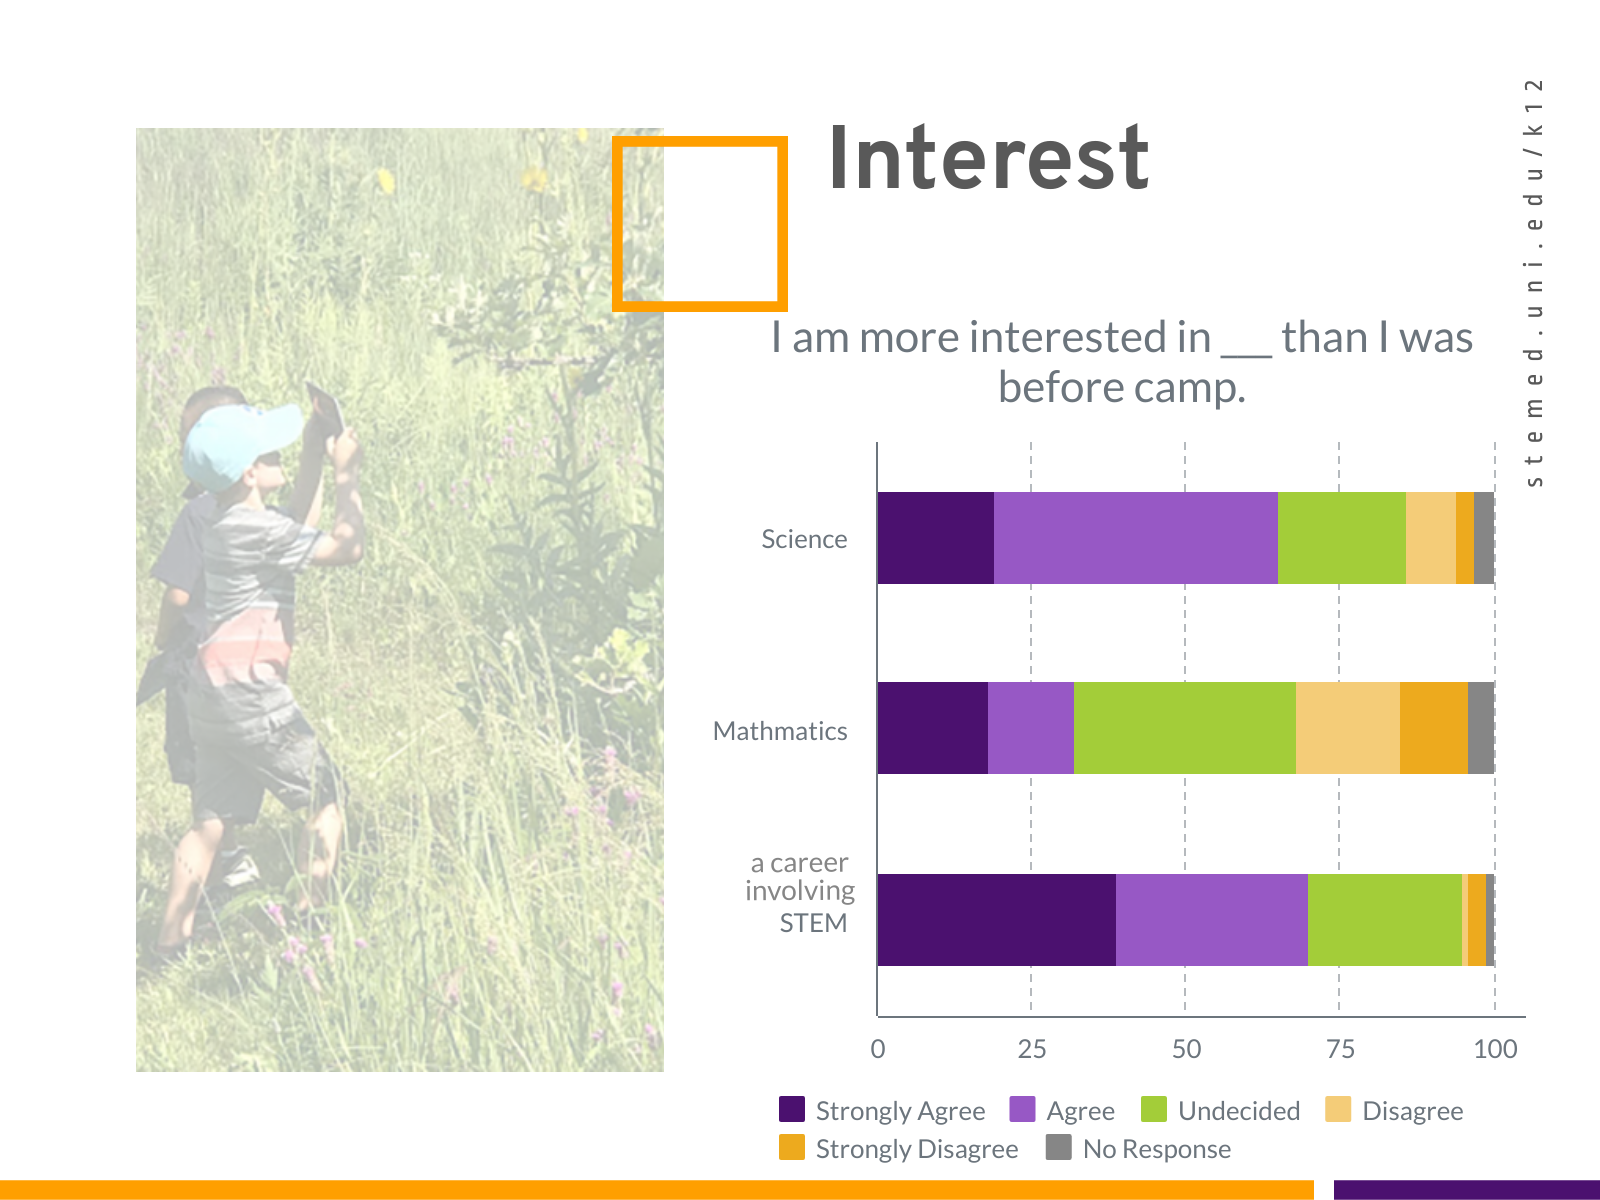 Graphs illustrate that campers believe that the camp experience positively impacts their interest in STEM areas and careers.